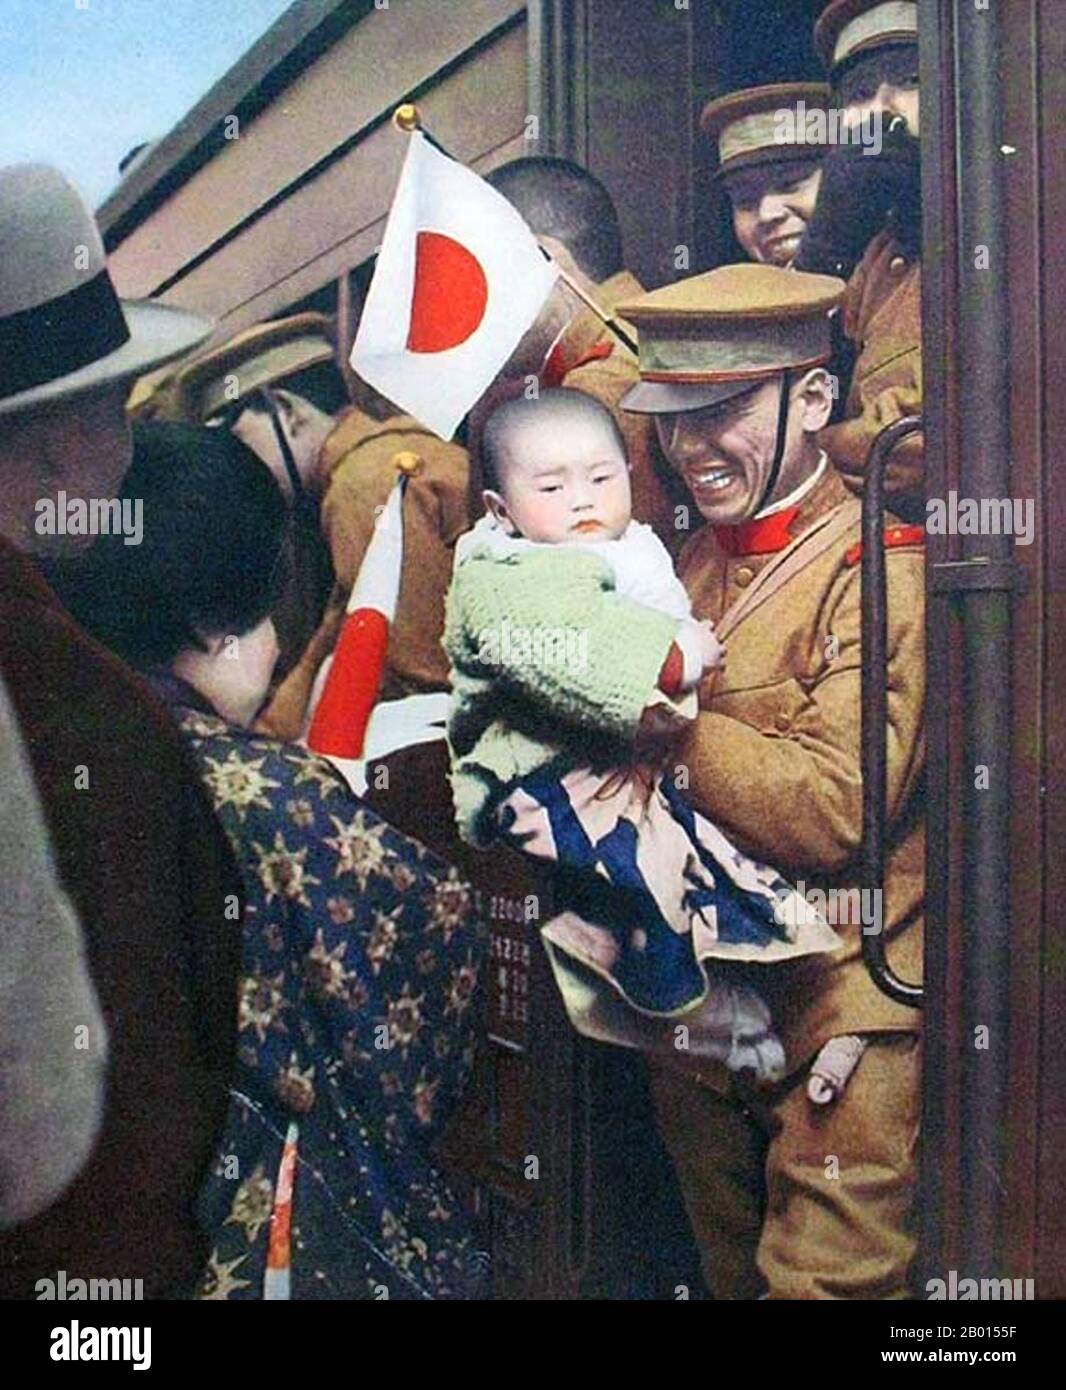 China: A Japanese soldier says goodbye to a young child before boarding a troop train in Manchuria, 1933.  The Second Sino-Japanese War is usually dated from 1937 to Japan's final defeat in 1945, but in fact Japan and China had been in a state of undeclared war from the time of the Mukden Incident in 1931 when Japan seized Manchuria and set up the puppet state of Manchukuo. The Japanese installed the former Qing Emperor Puyi as Head of State in 1932, and two years later he was declared Emperor of Manchukuo with the era name of Kangde ('Tranquility and Virtue'). Stock Photo